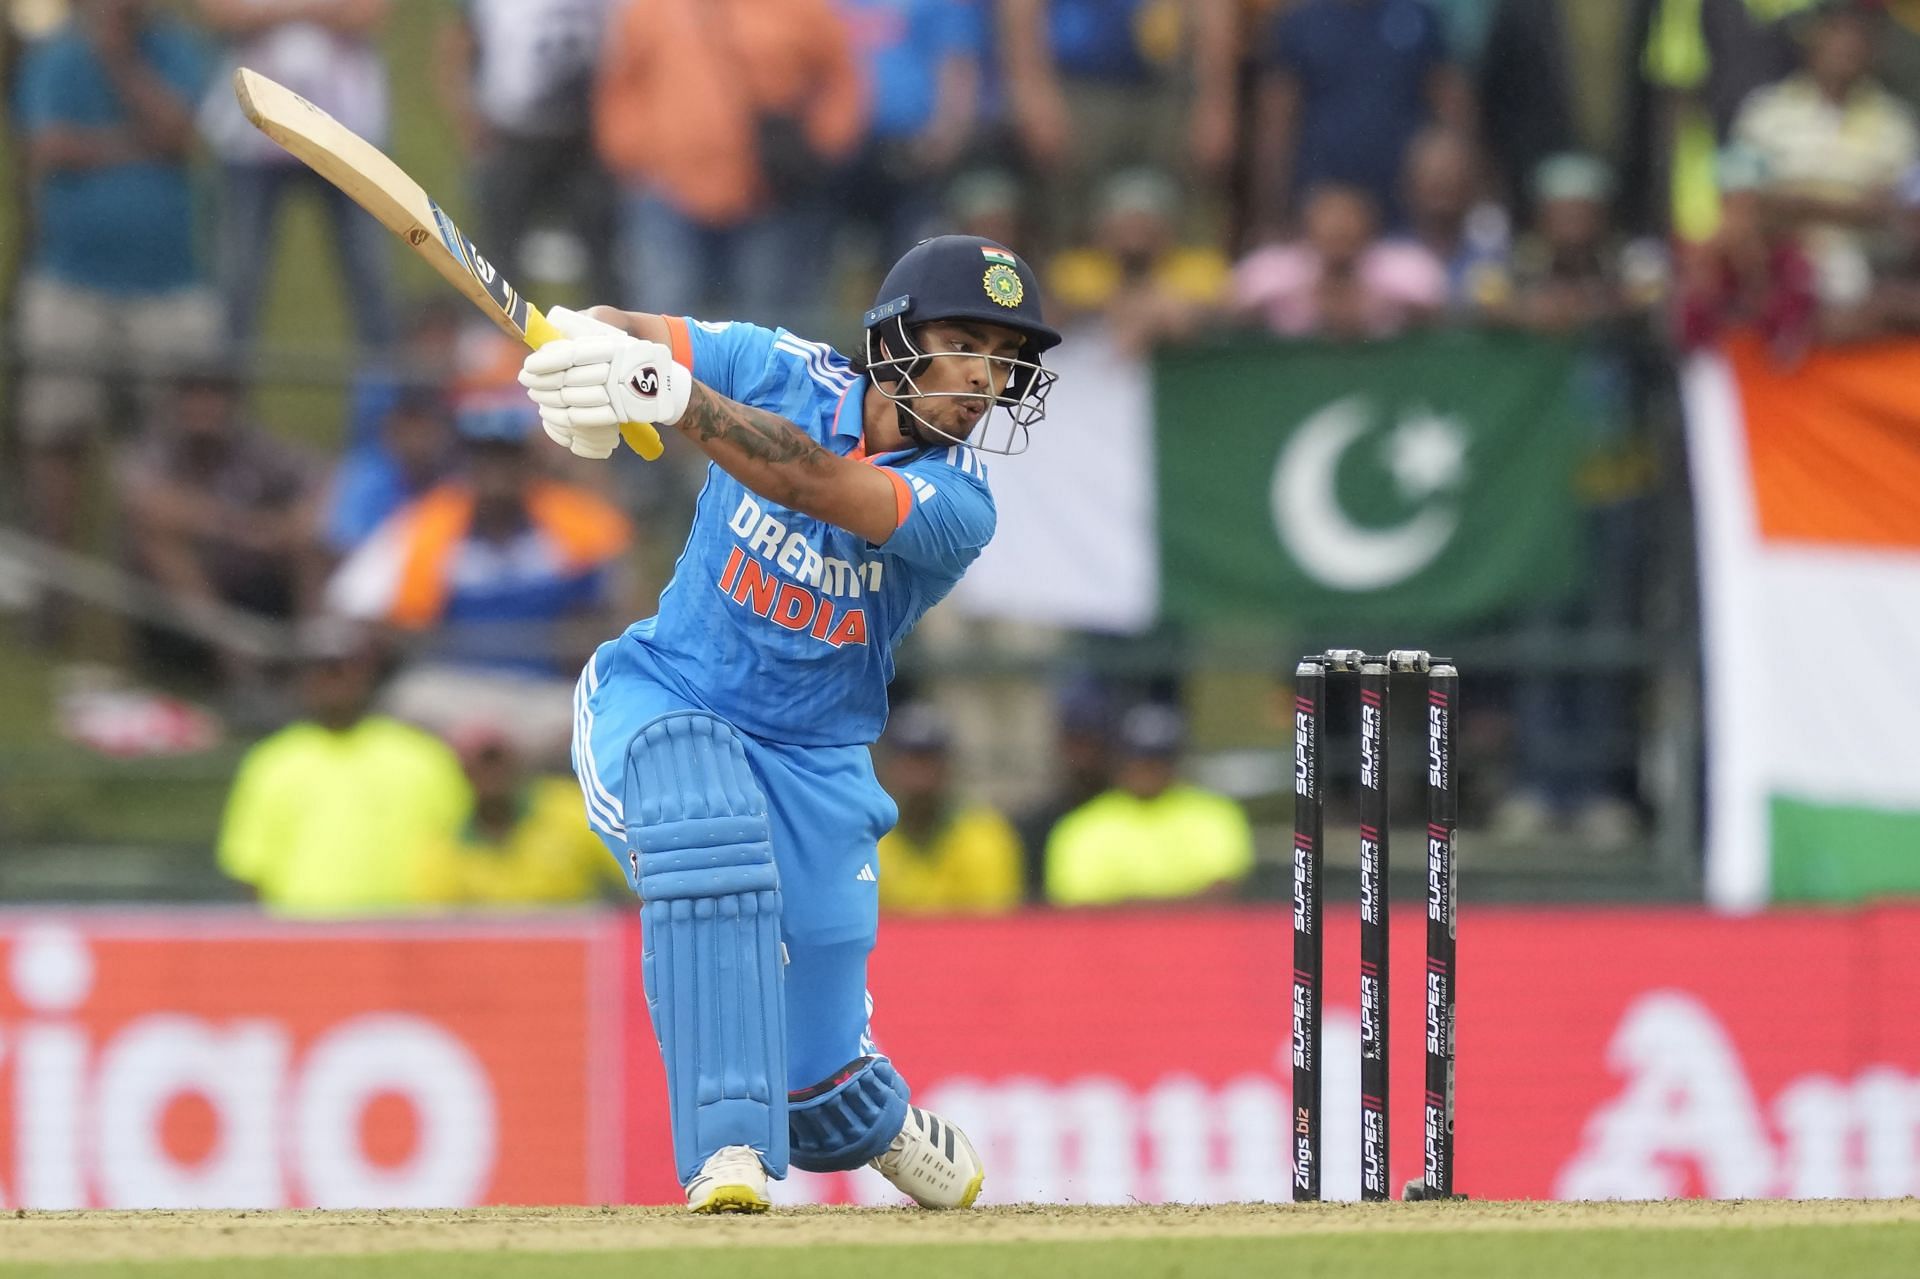 Few cricket experts believe Ishan Kishan is undroppable after his knock against Pakistan. [P/C: AP]